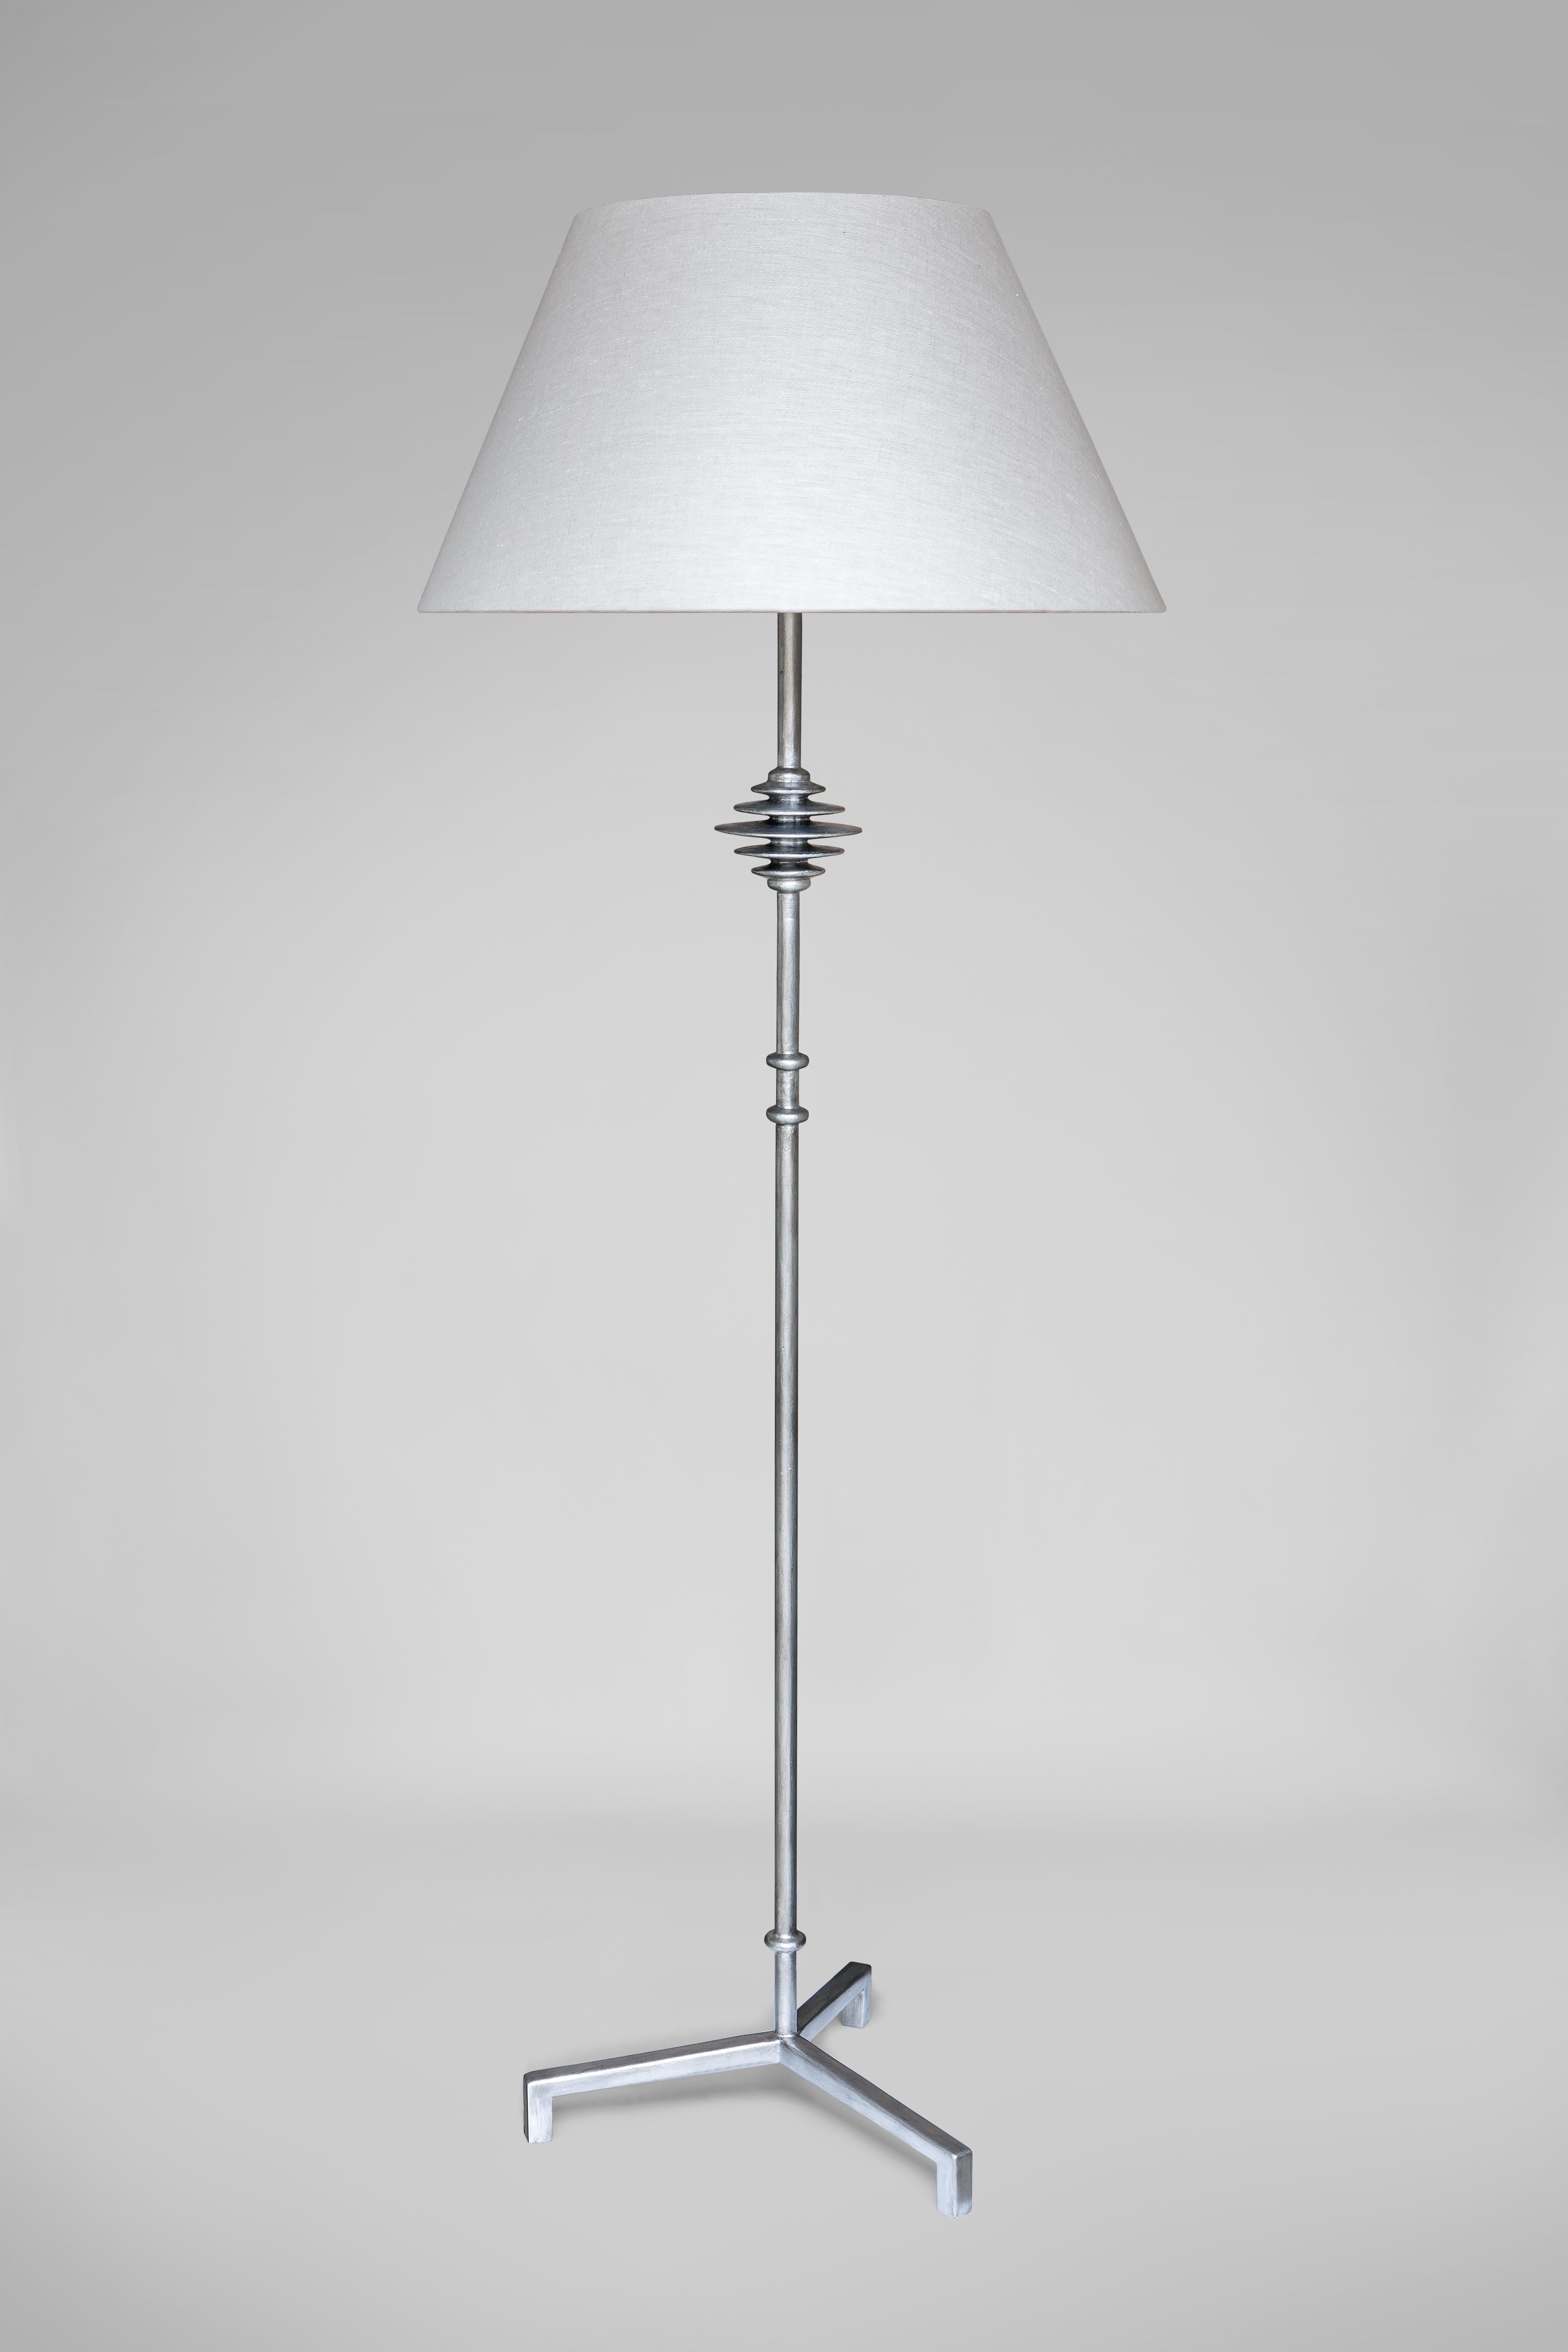 Floor lamp in hand sculpted plaster on metal armature, in the Giacometti Manner.

Lampshade  not included
Recommended Lampshade dimensions: 
Ø 31 top x Ø 55 bottom x H 34 cm / Ø 12,20″ top x Ø 21,65″ bottom x H 13,38″

LAMP 1 x Candelabra bulb / 1 x